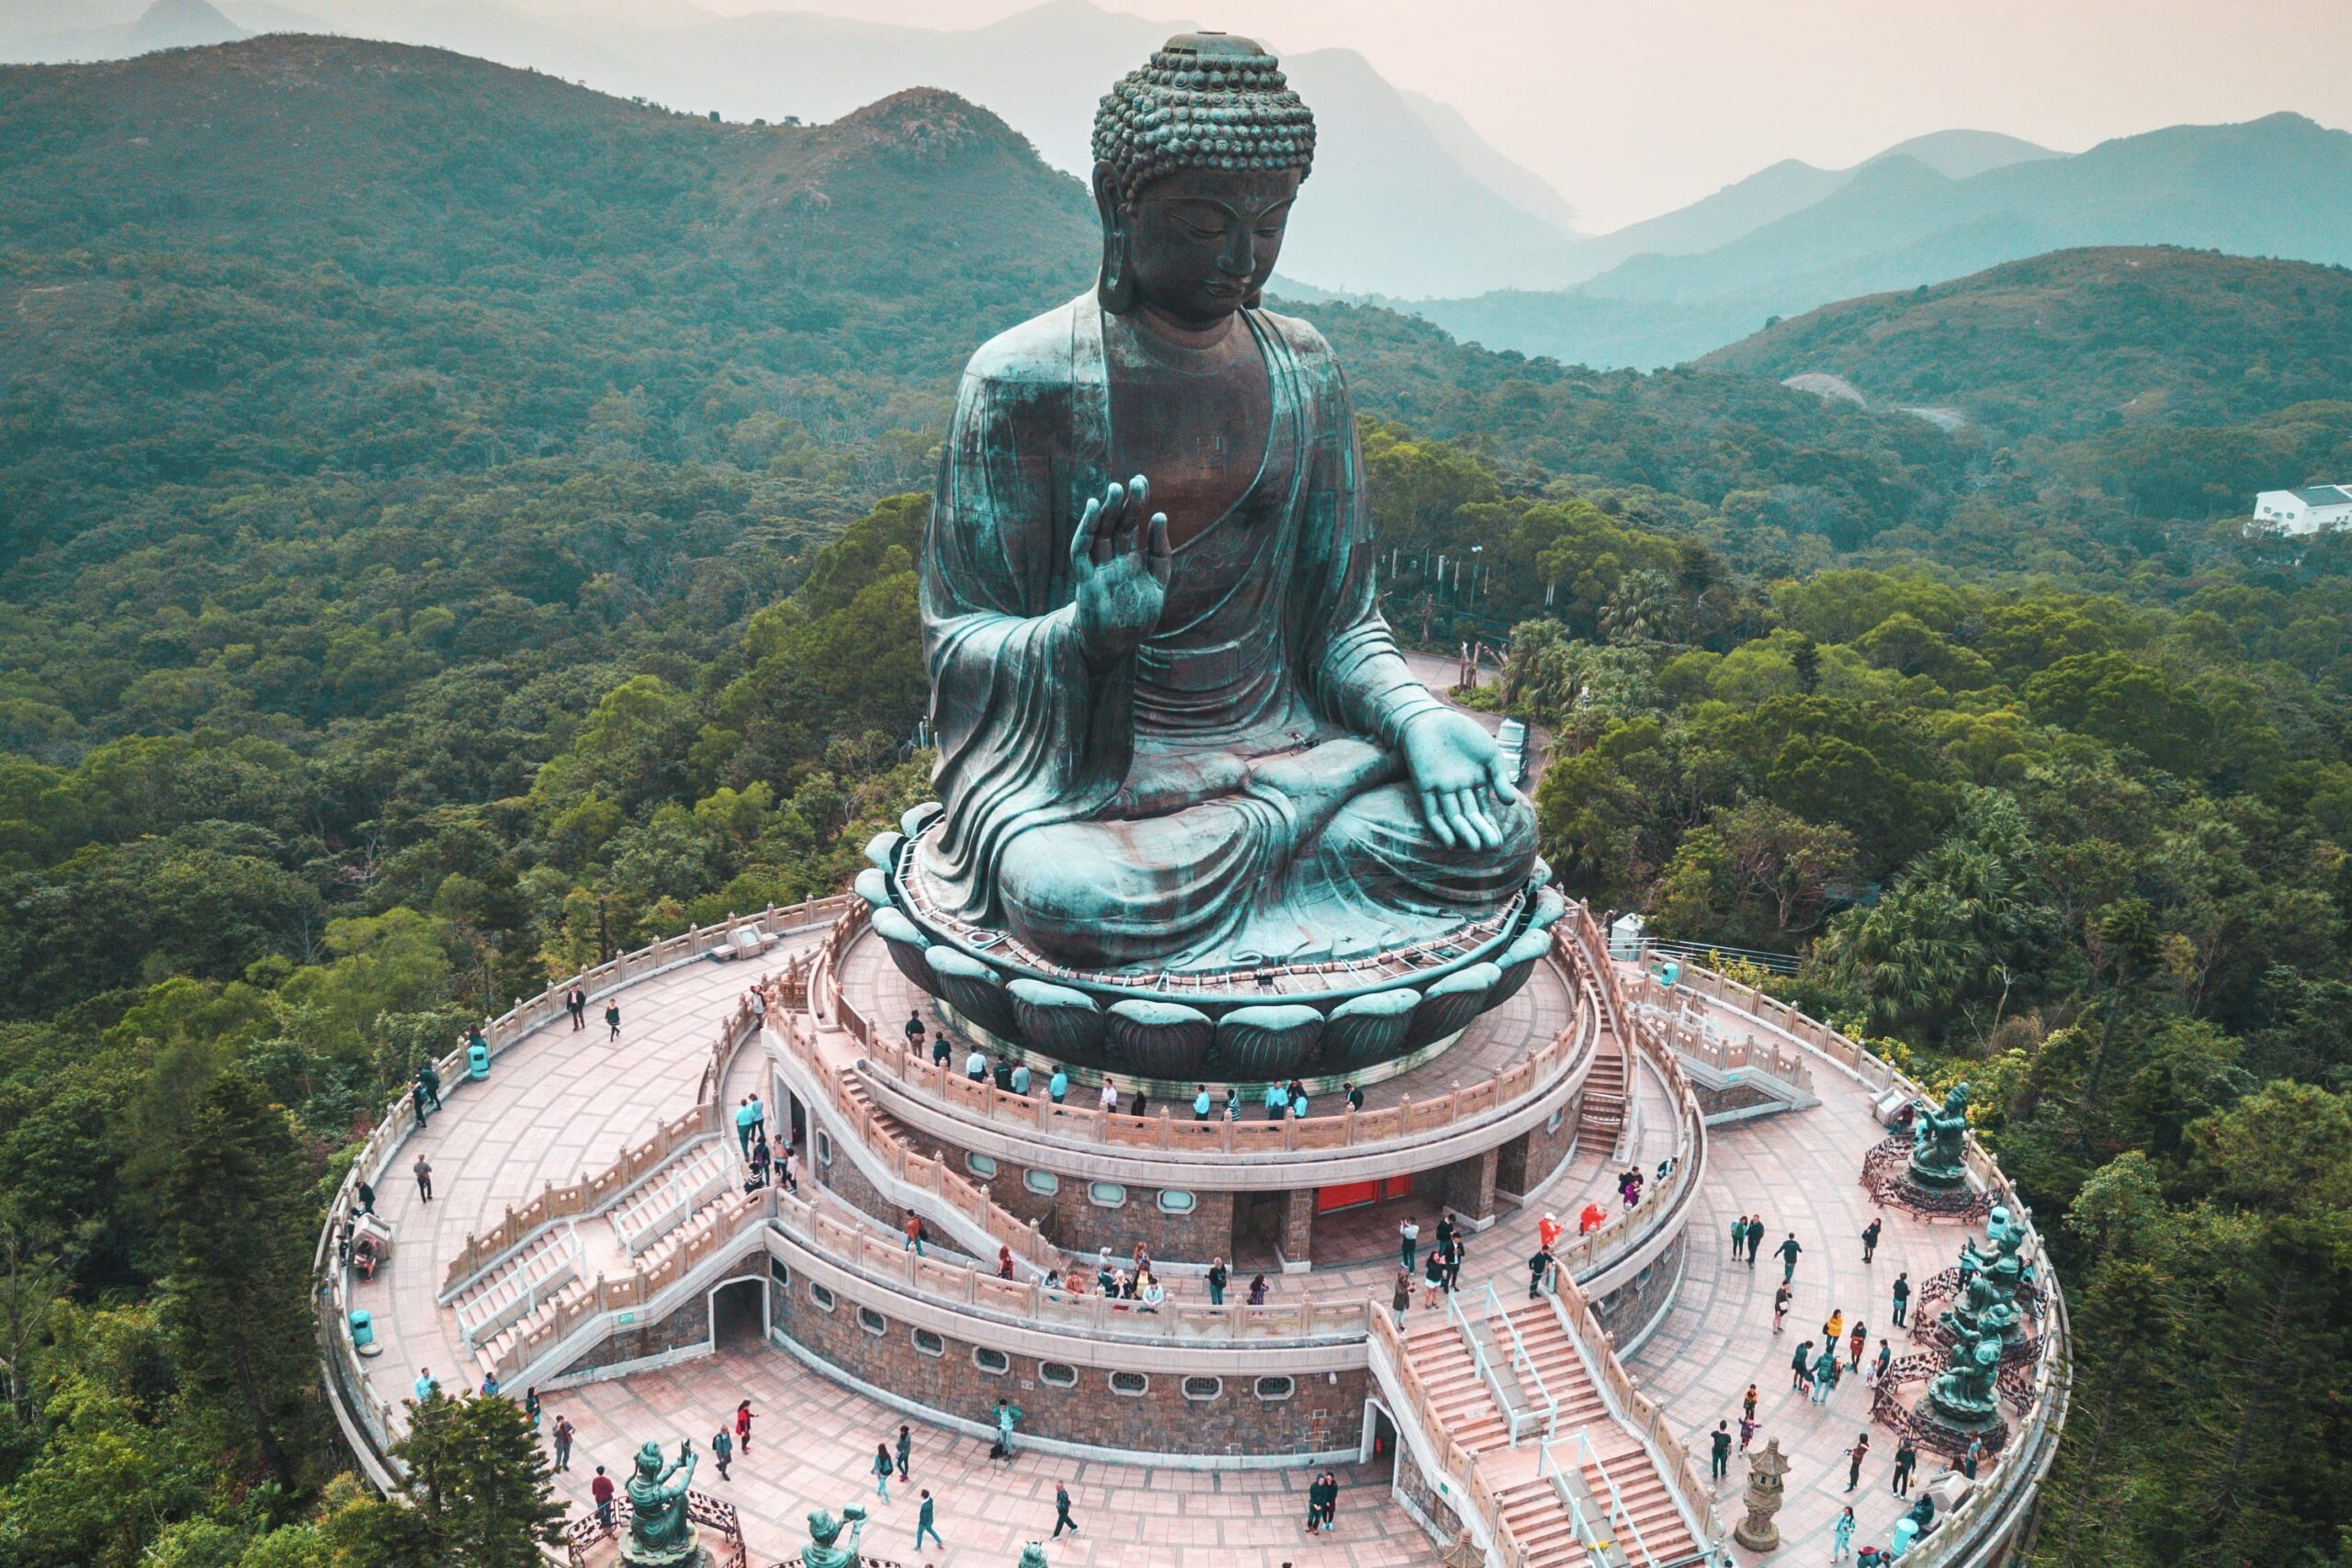 A bird's-eye view of the Tian Tan Buddha. The crowds around the base of the statue can be seen, as well as the forested hills that surround the statue.